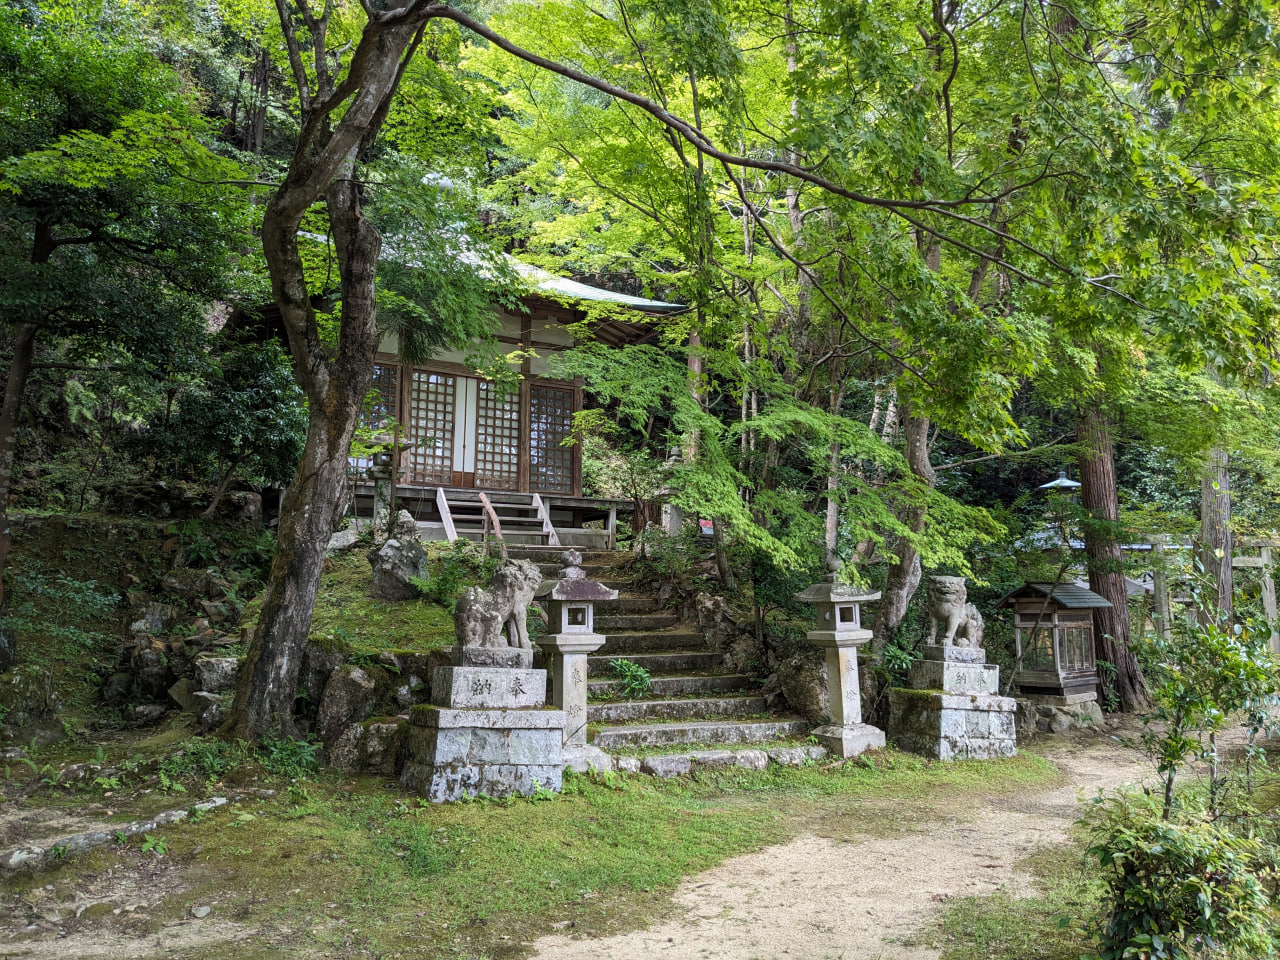 a shrine is surrounded by trees, like they are consuming it in foliage